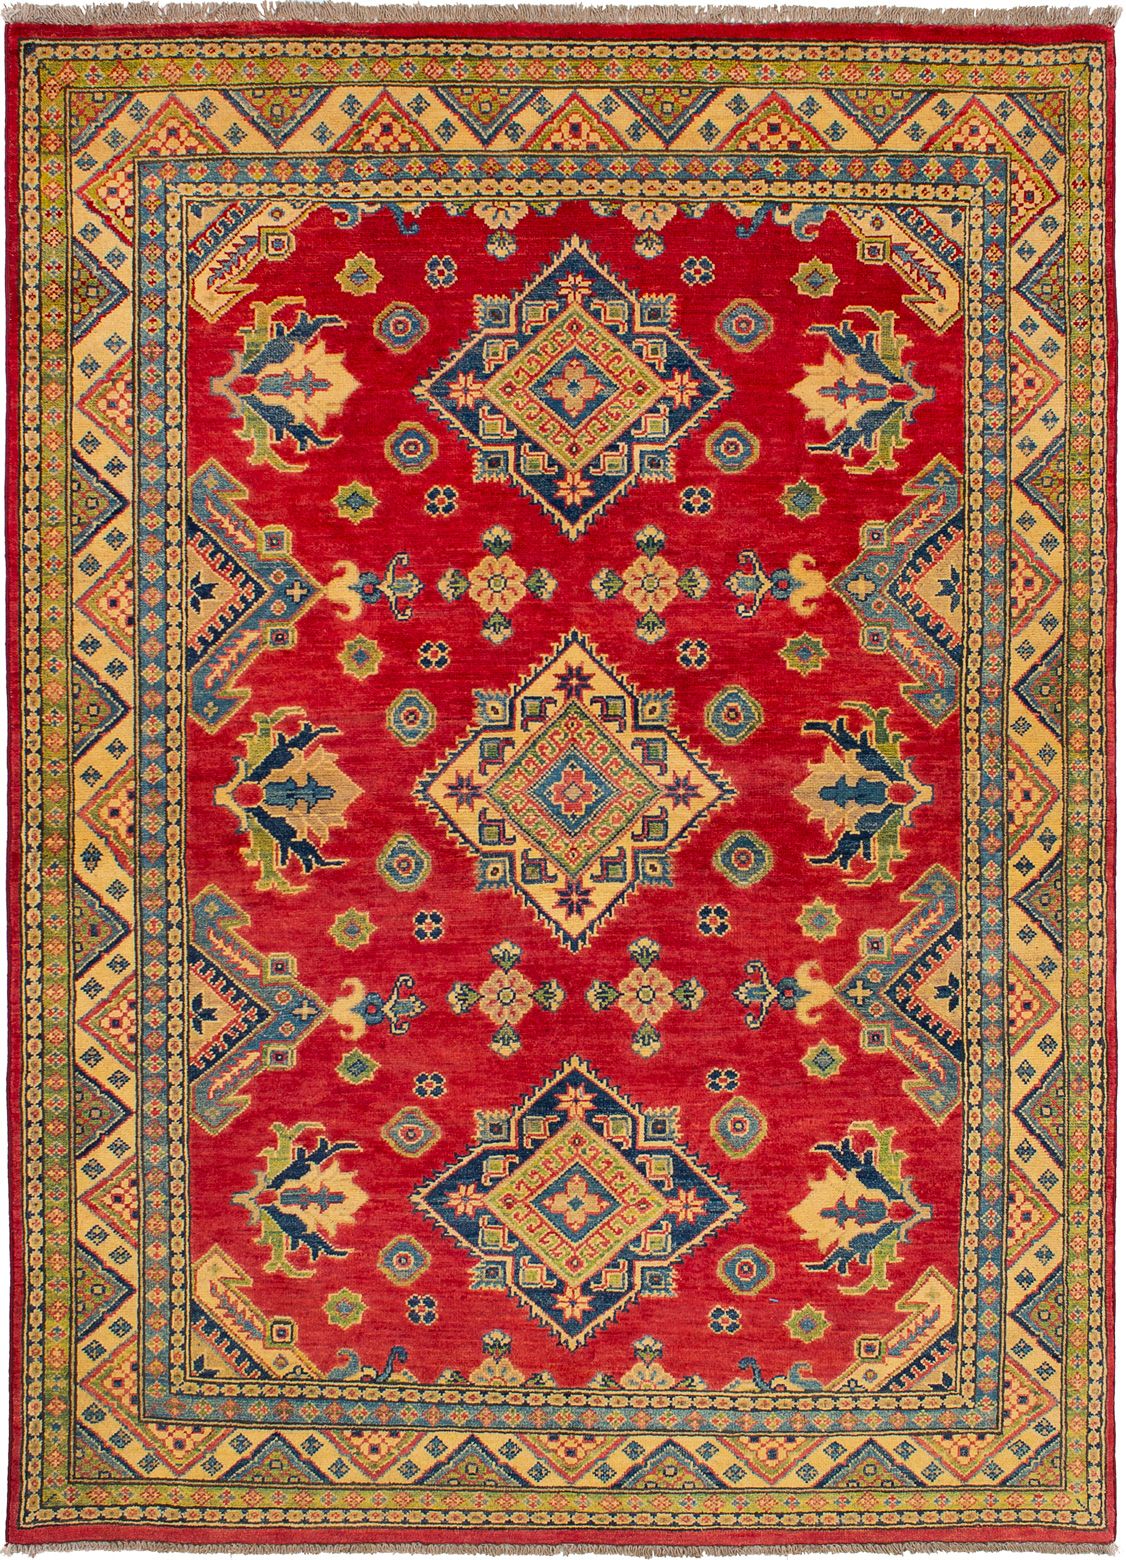 Hand-knotted Finest Gazni Red Wool Rug 4'11" x 6'11"  Size: 4'11" x 6'11"  